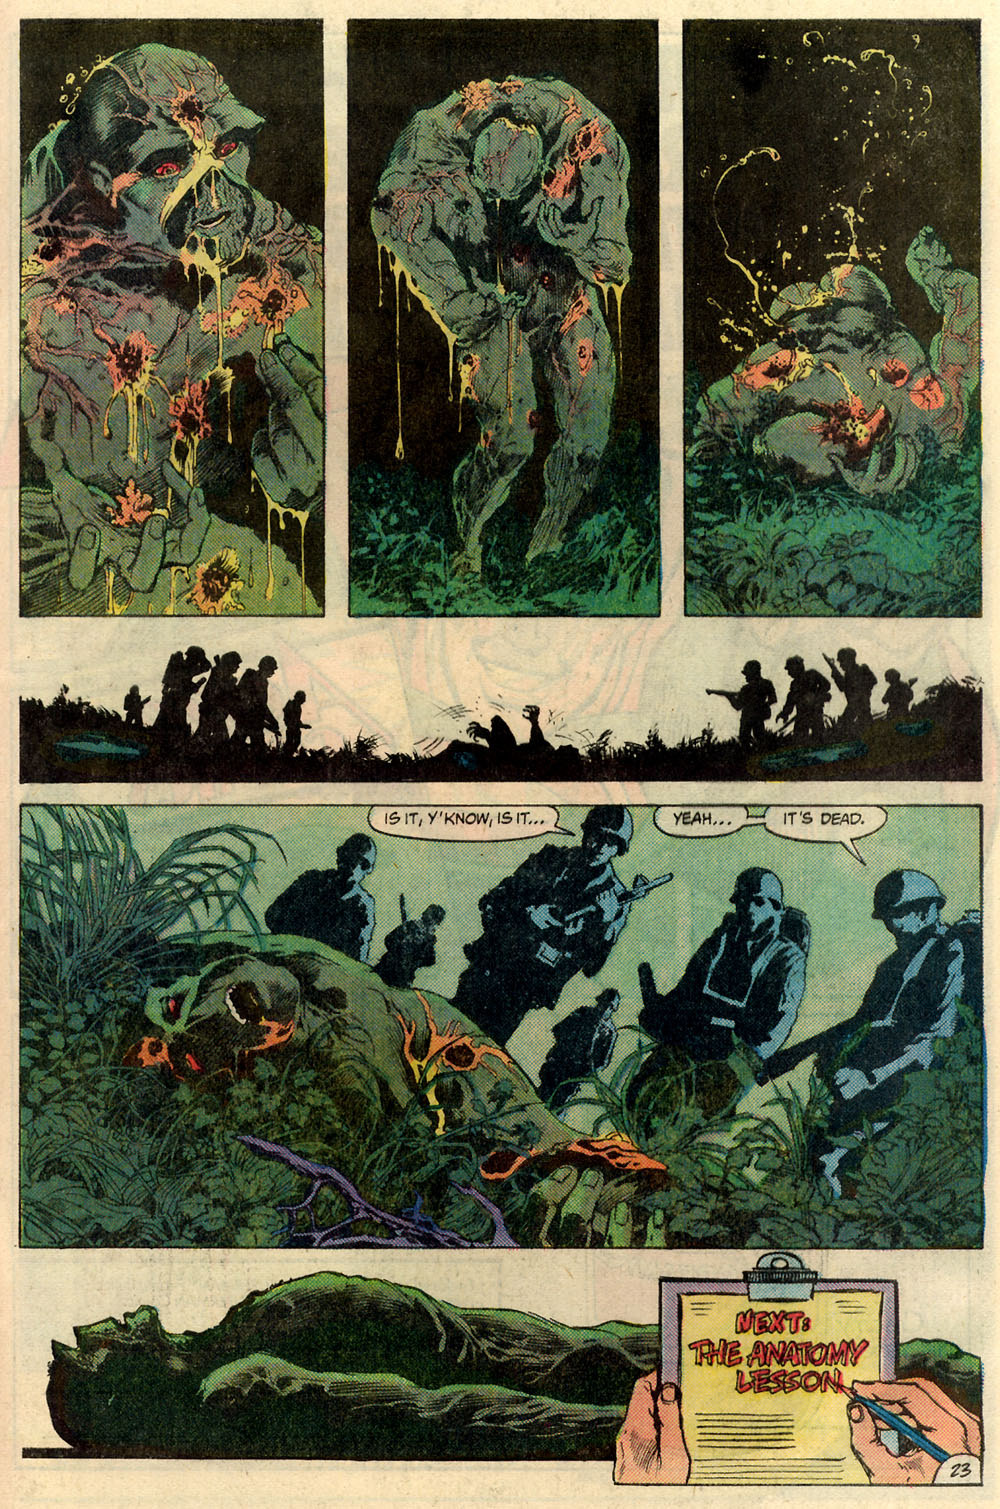 Alec Holland is gunned down by the Sunderland Corporation's foot soldiers in Swamp Thing Vol. 2 #20 "Loose Ends" (1984), DC Comics. Words by Alan Moore, art by Dan Day, John Totleben, Tatjana Wood, and John Costanza